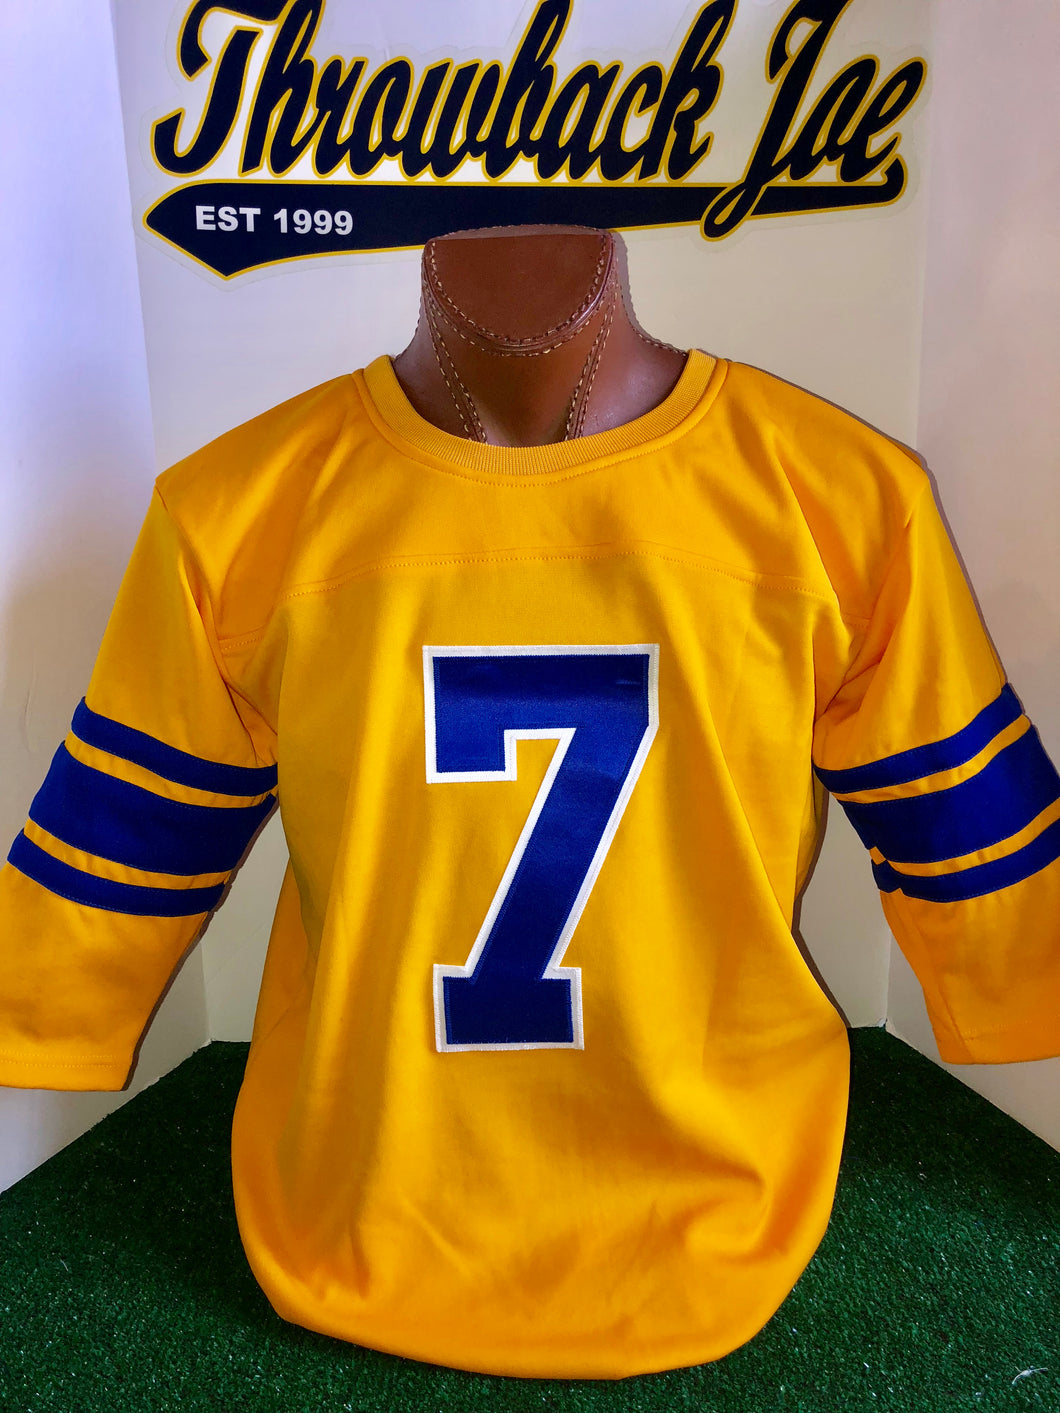 1950's STYLE YELLOW JERSEY w/ WHITE TRIMMED NUMBERS – Throwback Joe